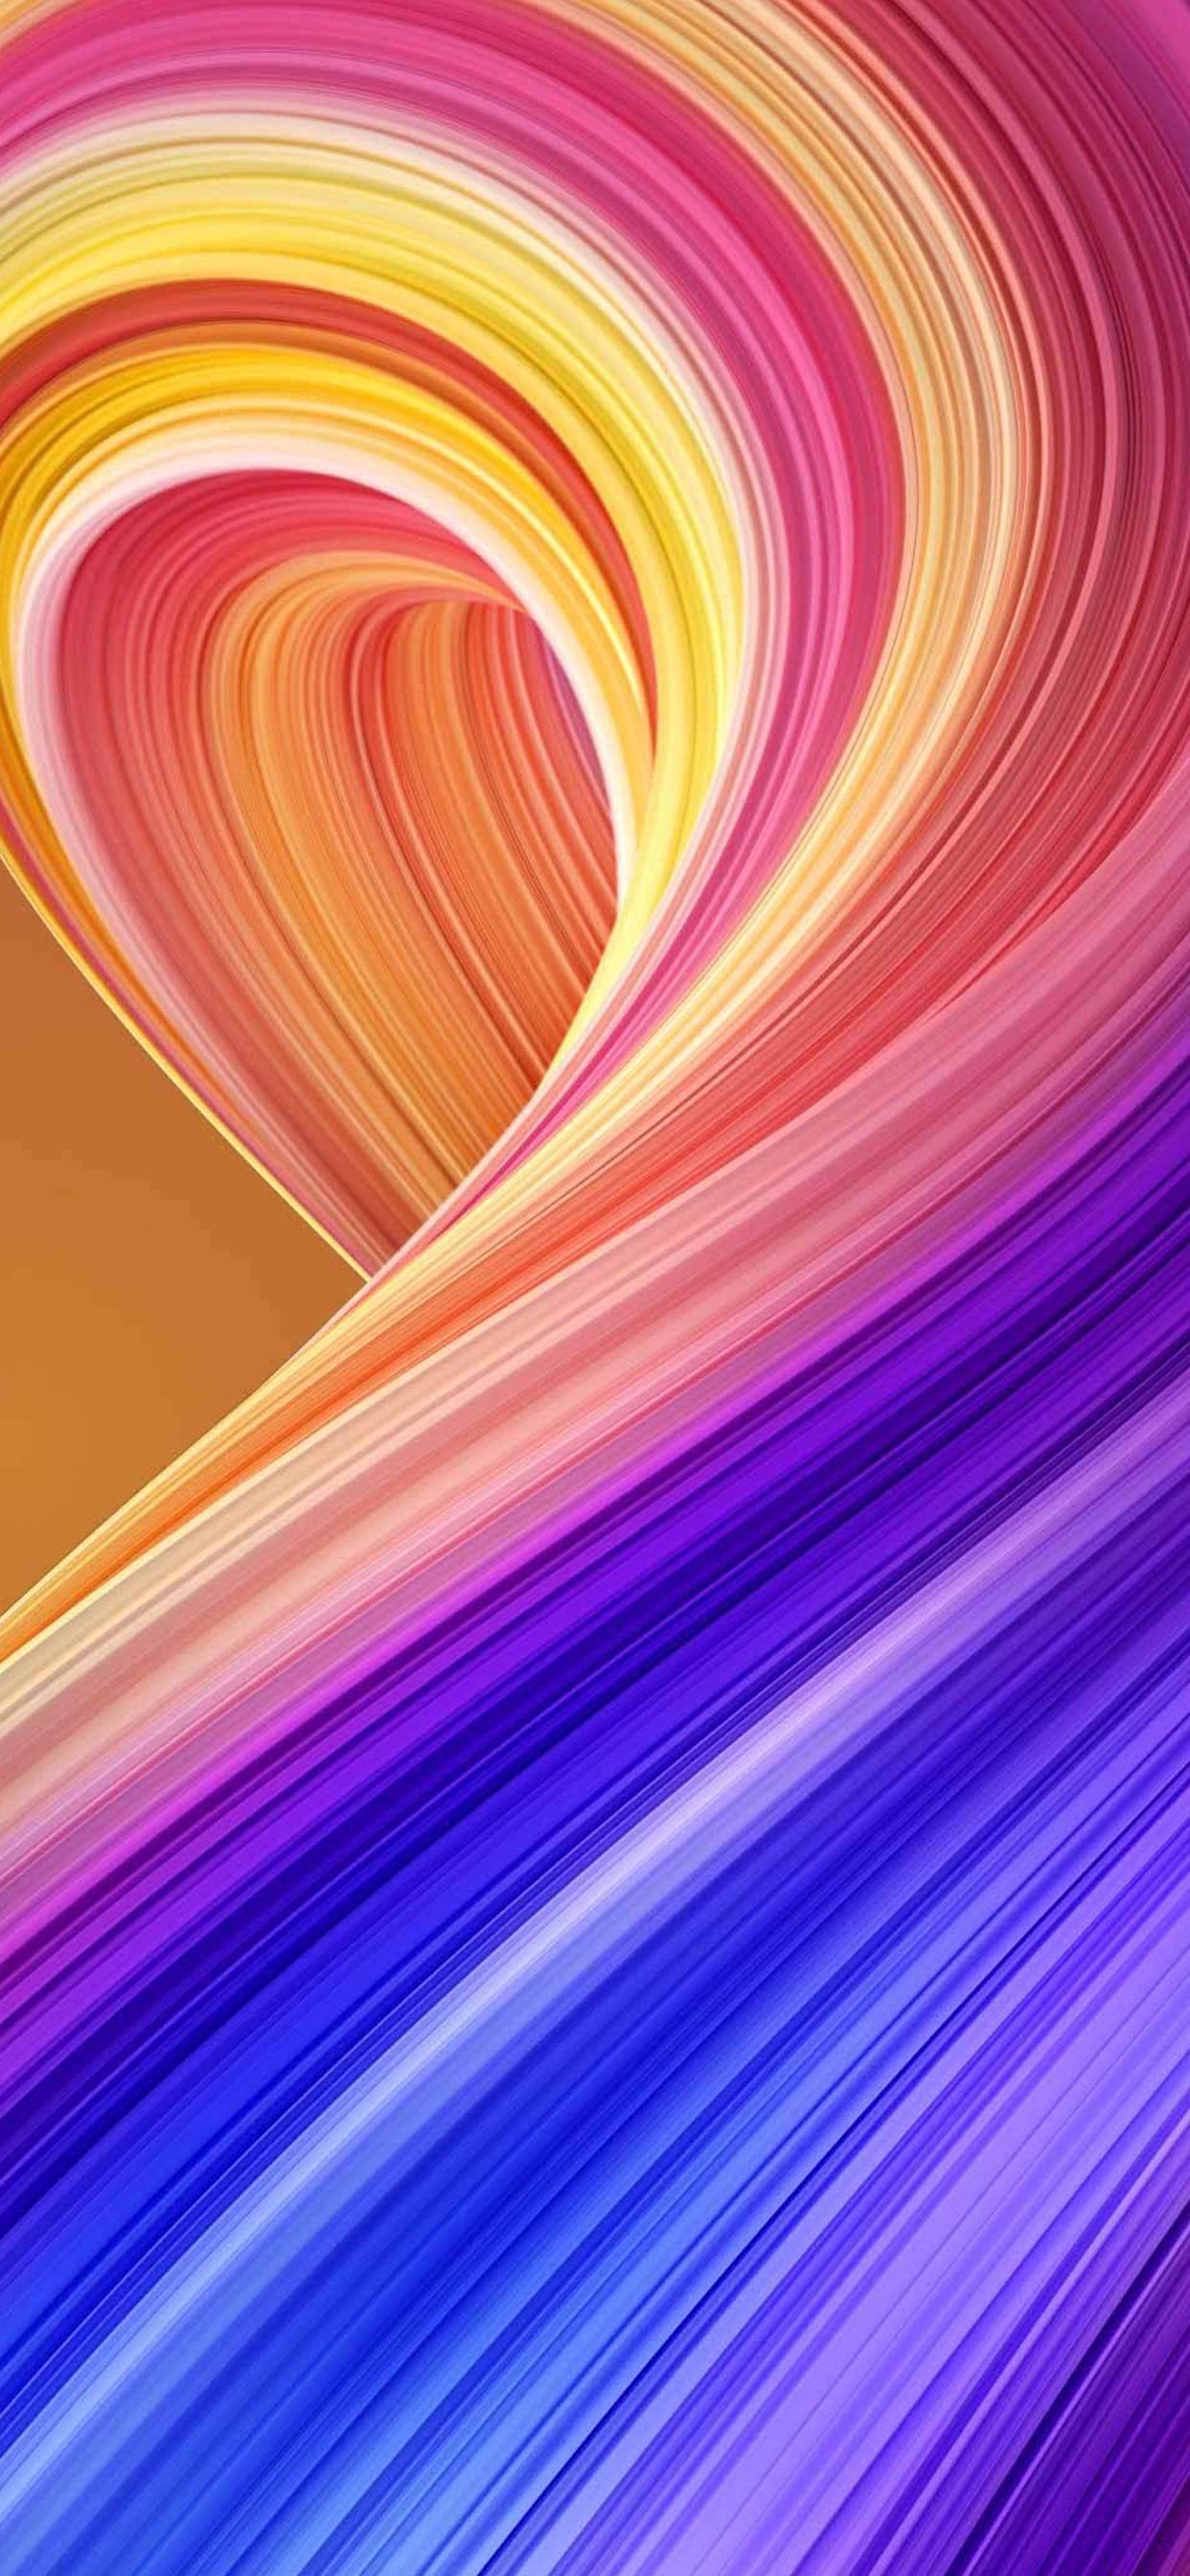 1242x2688 Top 10 Best Alternative Wallpaper for Apple iPhone XS Max 07 of 10 -  Colorful Abstract 3D